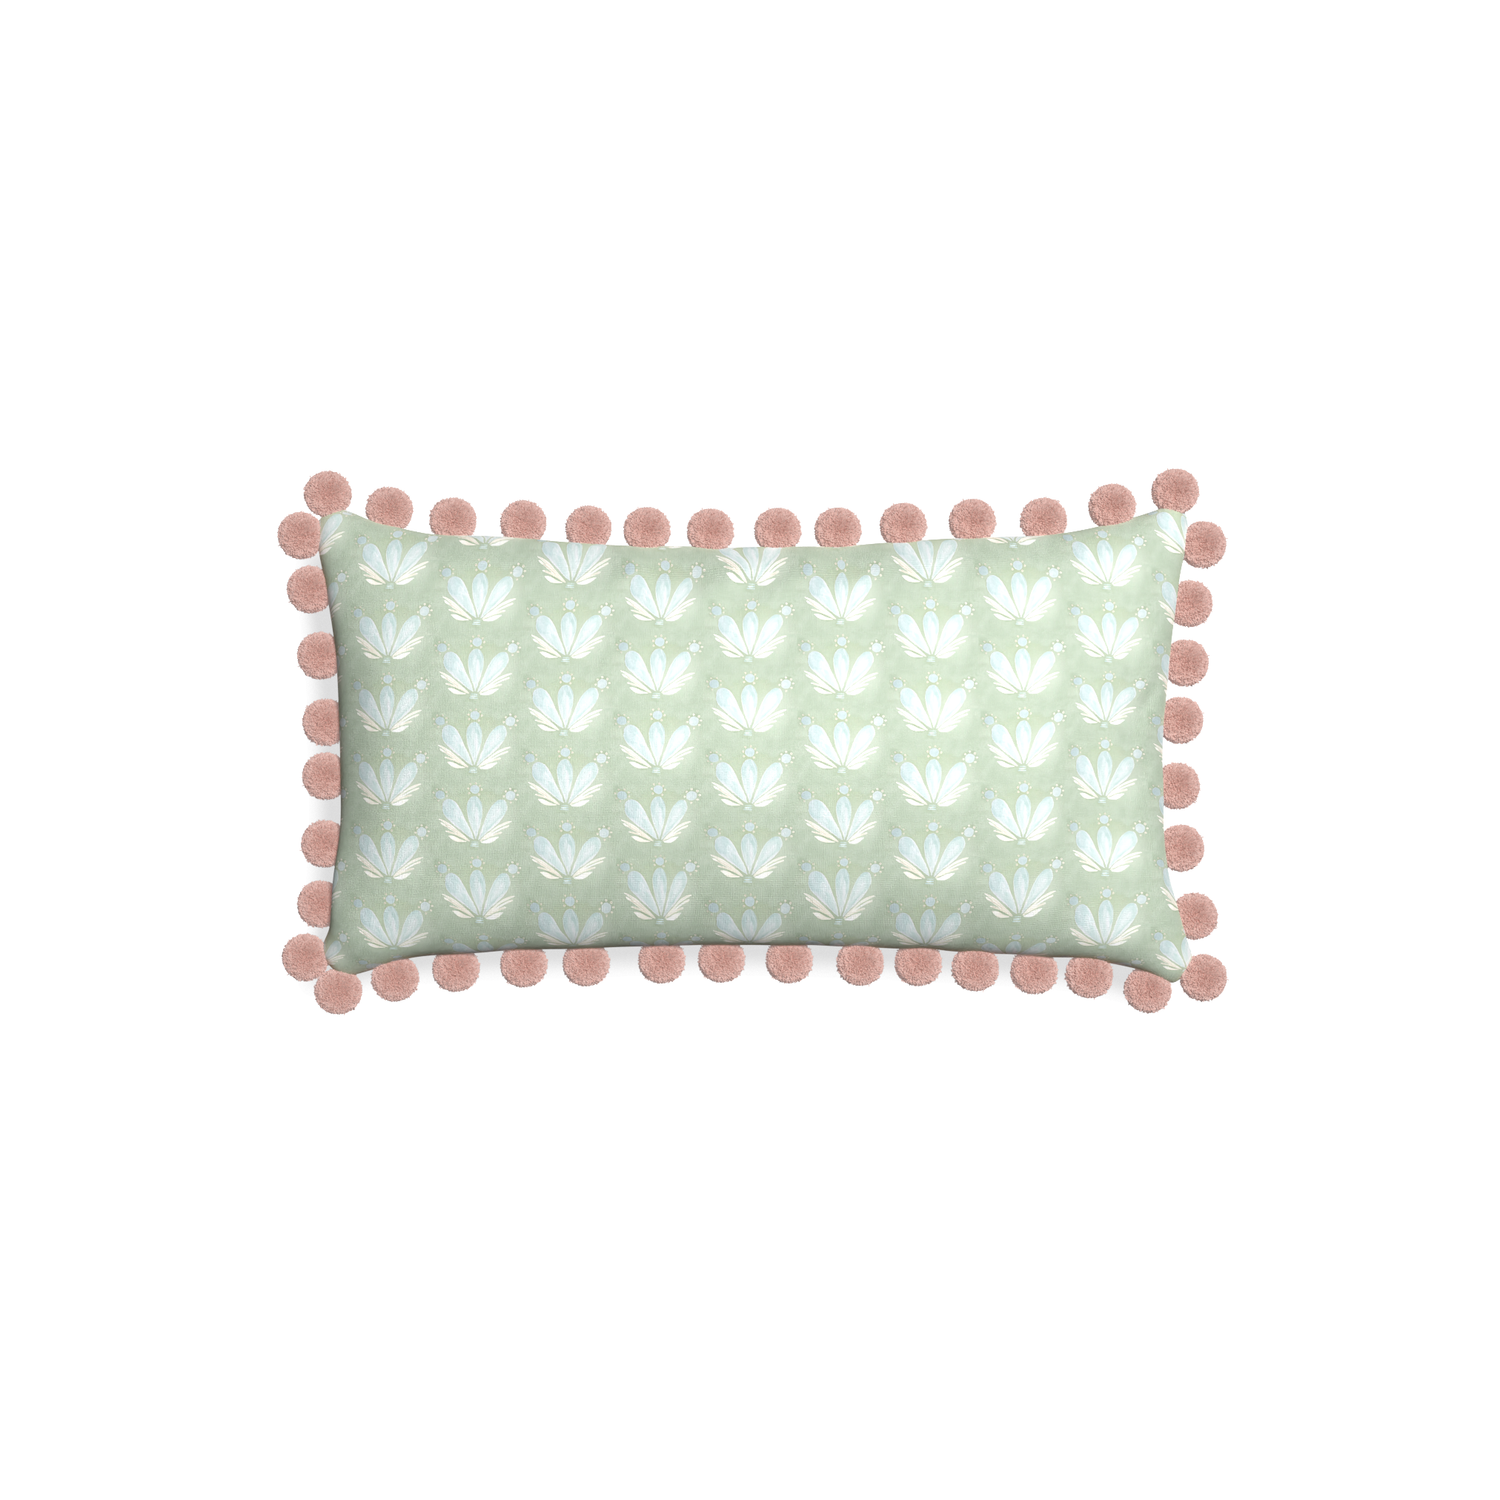 Petite-lumbar serena sea salt custom blue & green floral drop repeatpillow with rose pom pom on white background